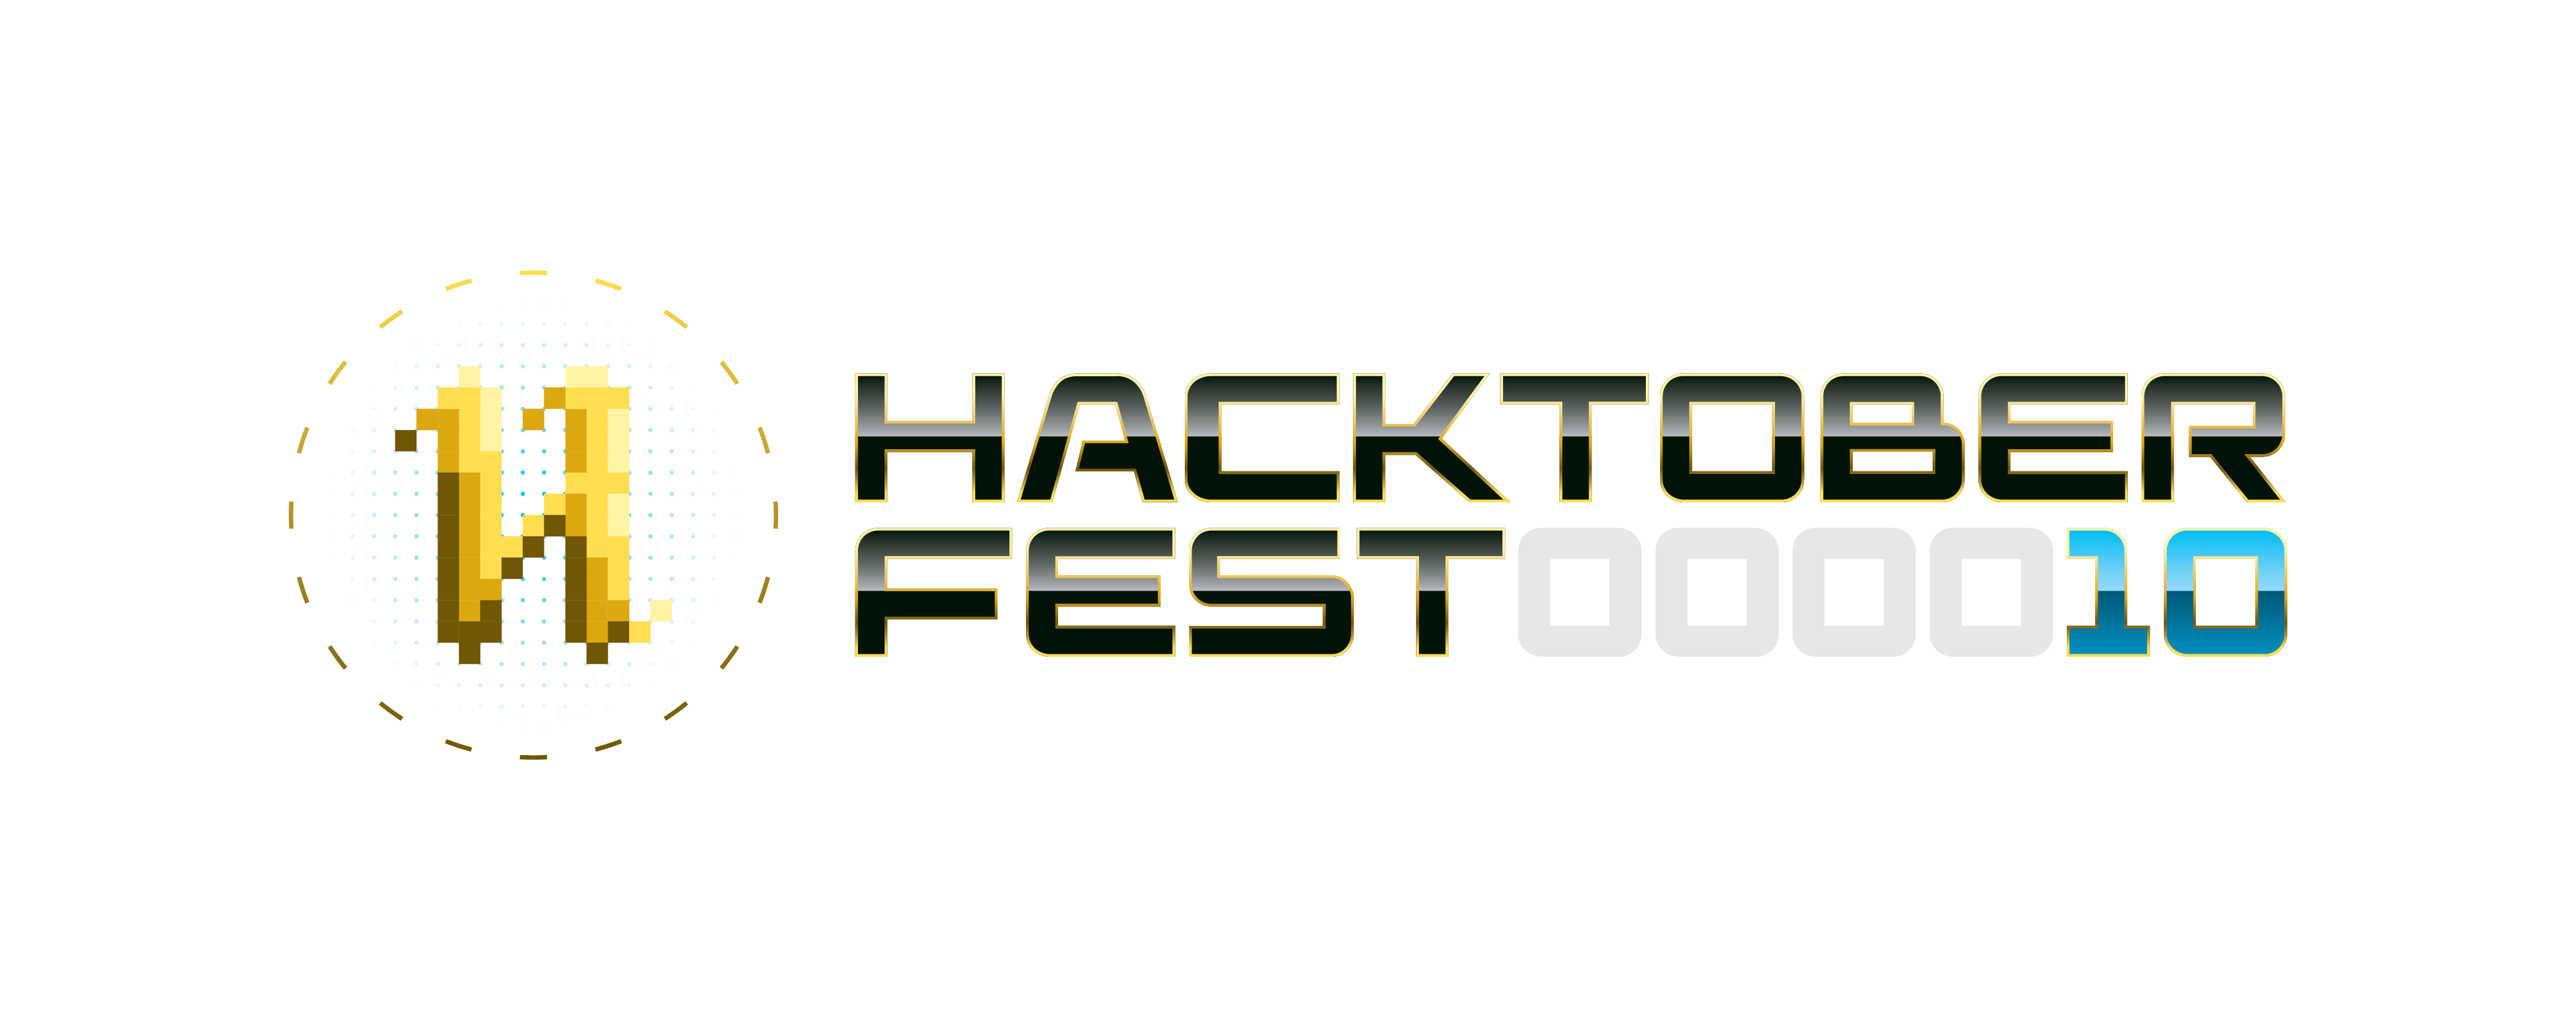 A colourful photo showing the Hacktoberfest logo